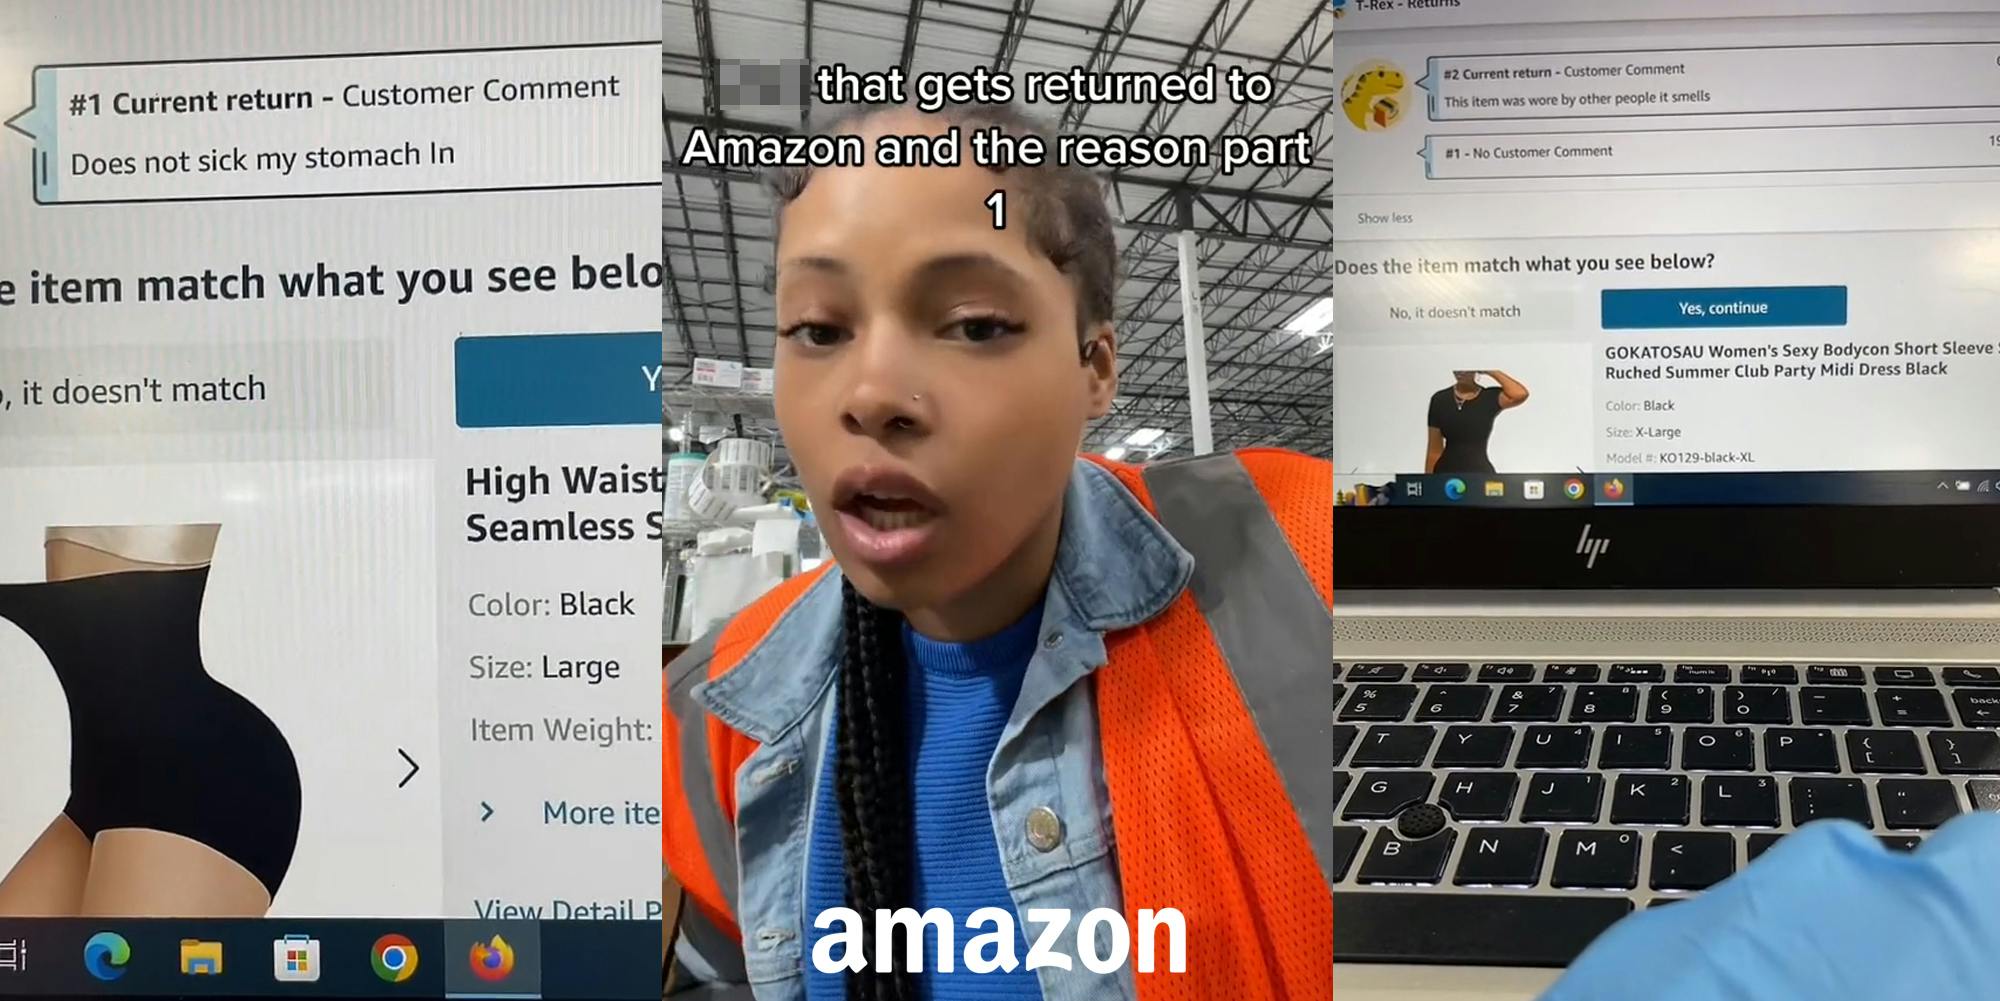 Amazon returns on laptop screen with comment "Does not sick my stomach in" (l) Amazon employee speaking with caption "blank that gets returned to Amazon and the reason part 1" with Amazon logo at bottom (c) Amazon worker using laptop with Amazon returns on screen (r)